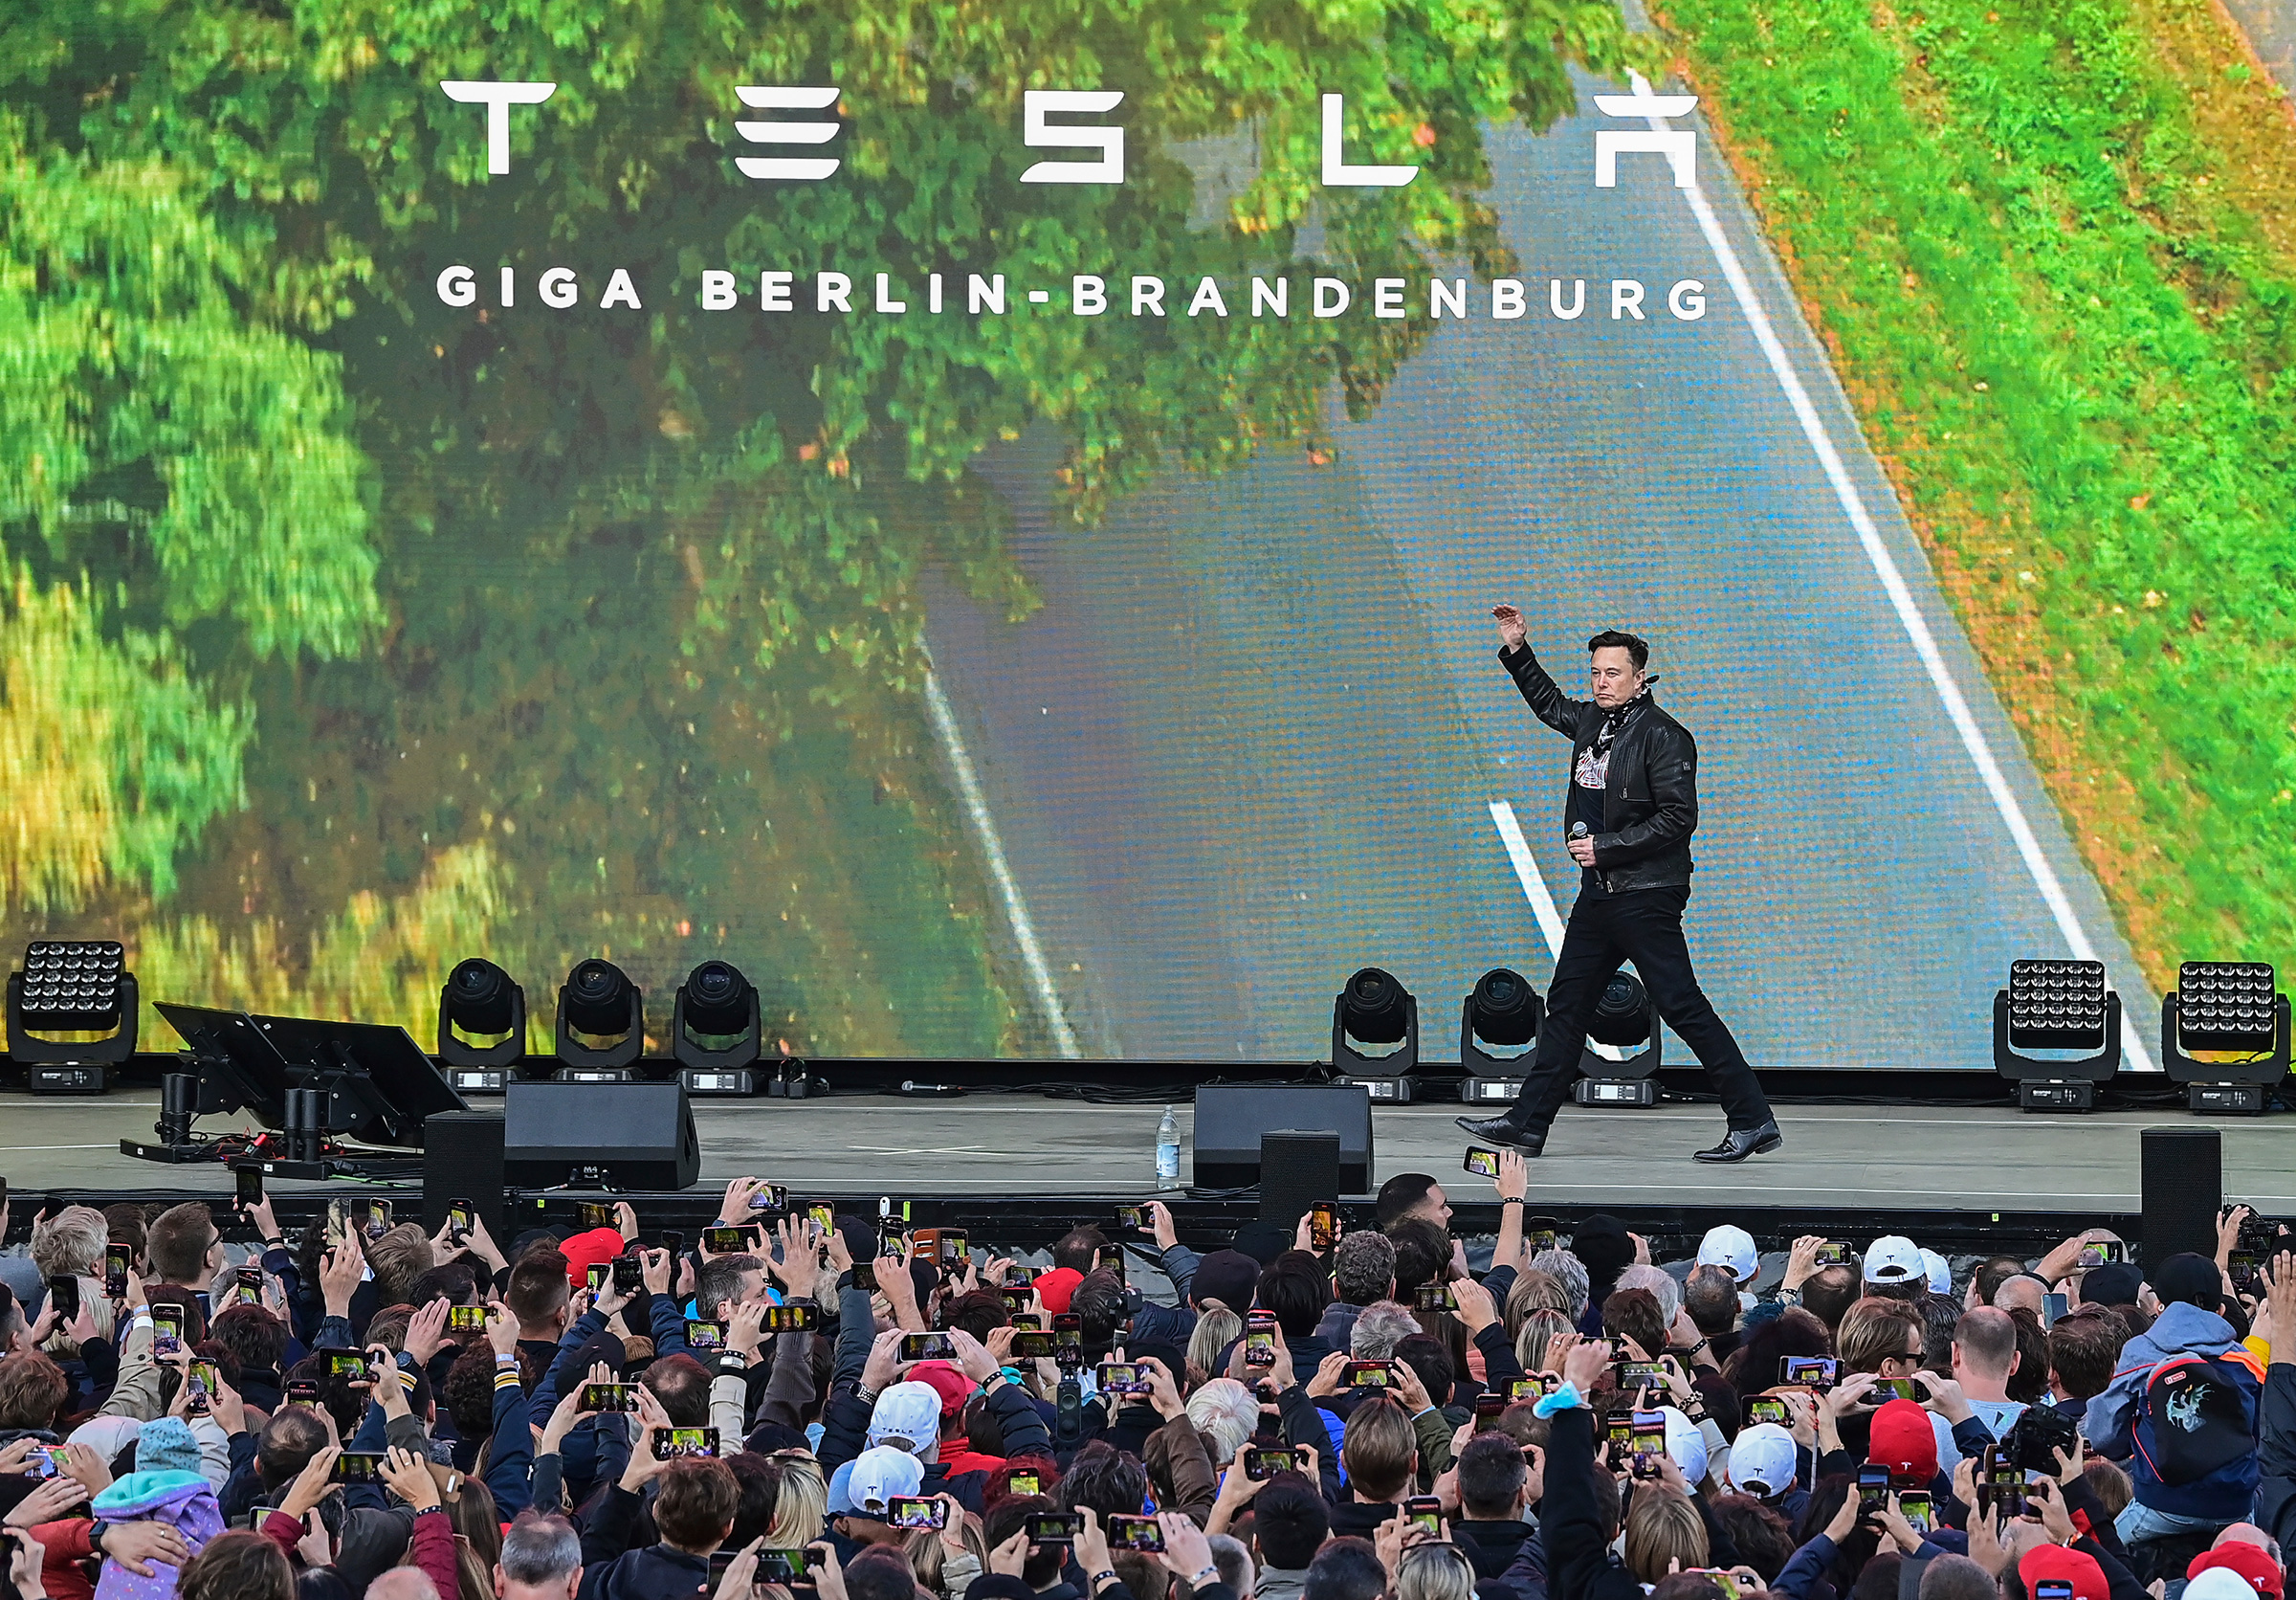 Musk at the Tesla Gigafactory in Grünheide, Germany, on oct. 9 (Patrick Pleul—Picture-Alliance/DPA/AP)